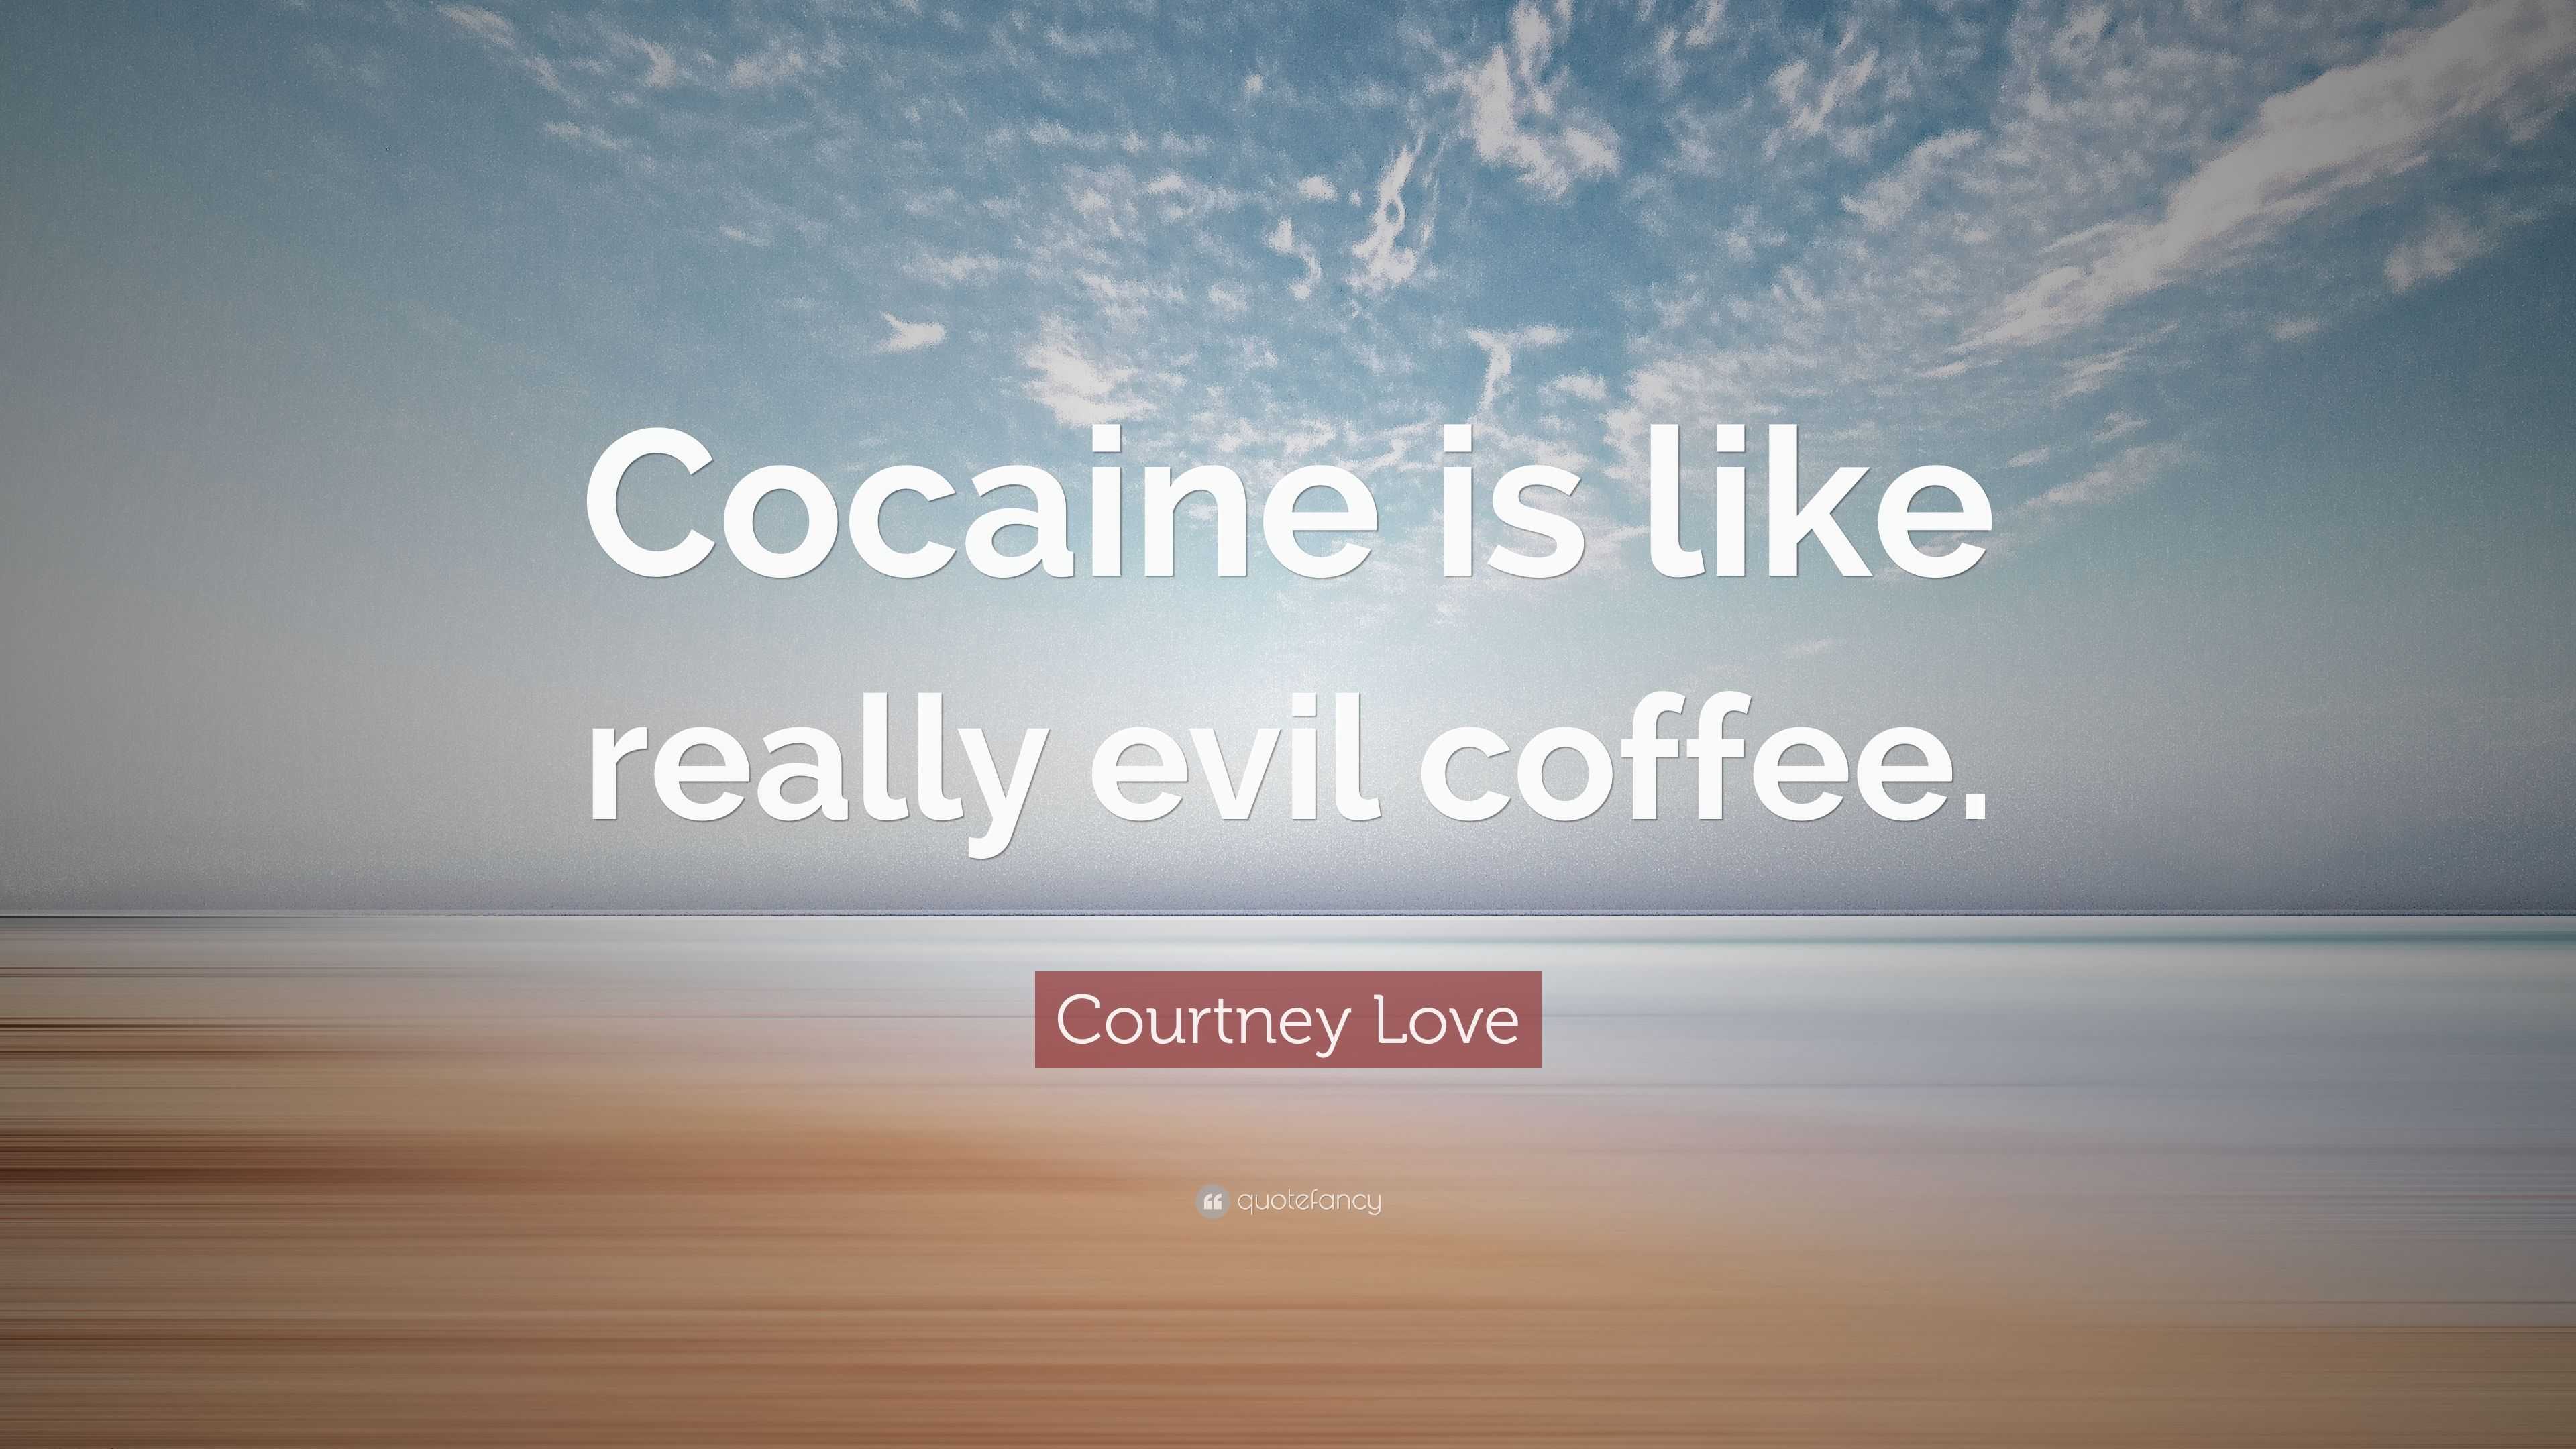 Courtney Love Quote “Cocaine is like really evil coffee ”